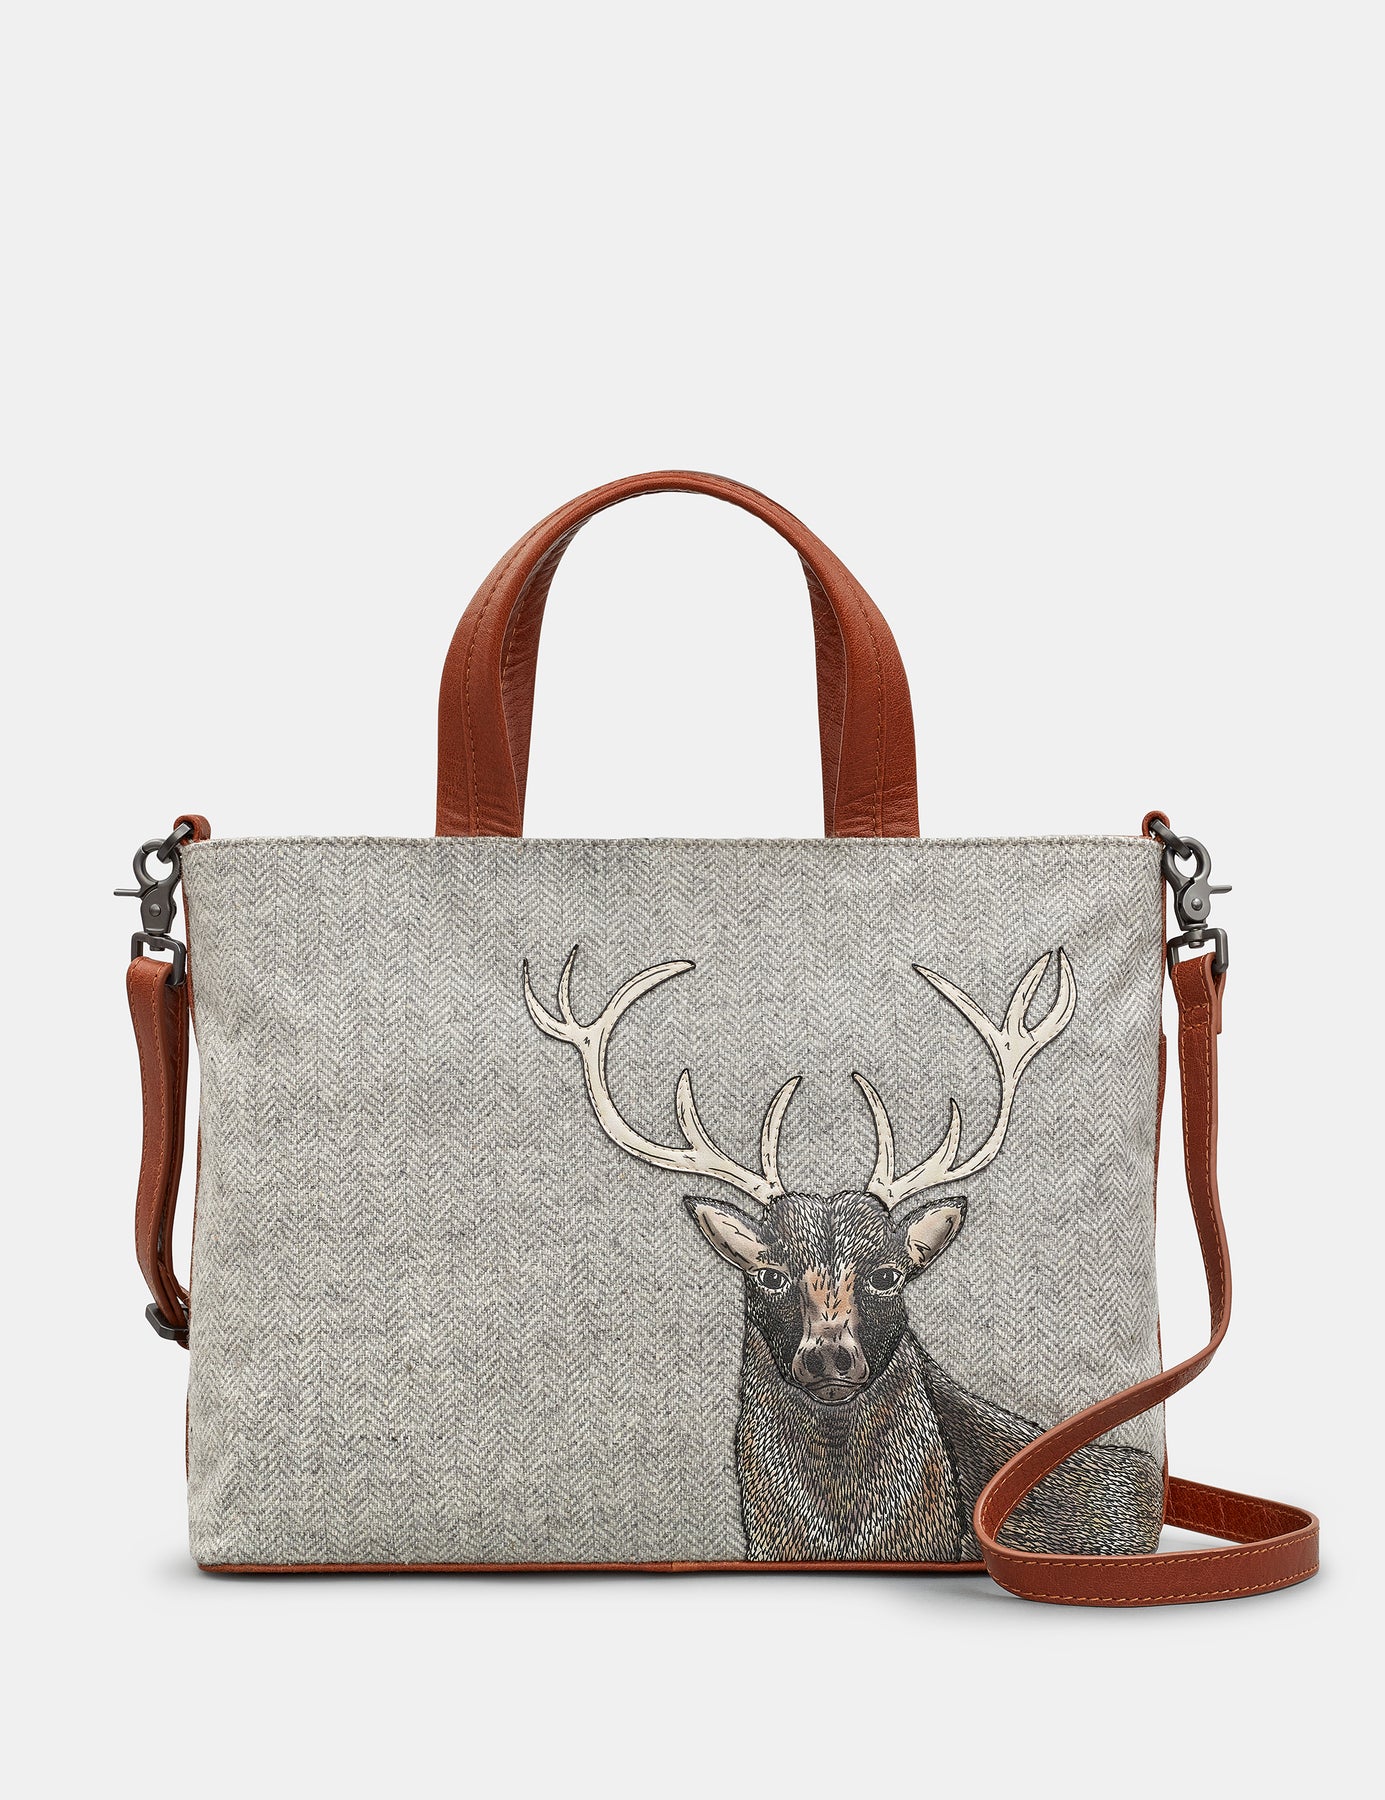 Deer-print leather shoulder bag with chain strap